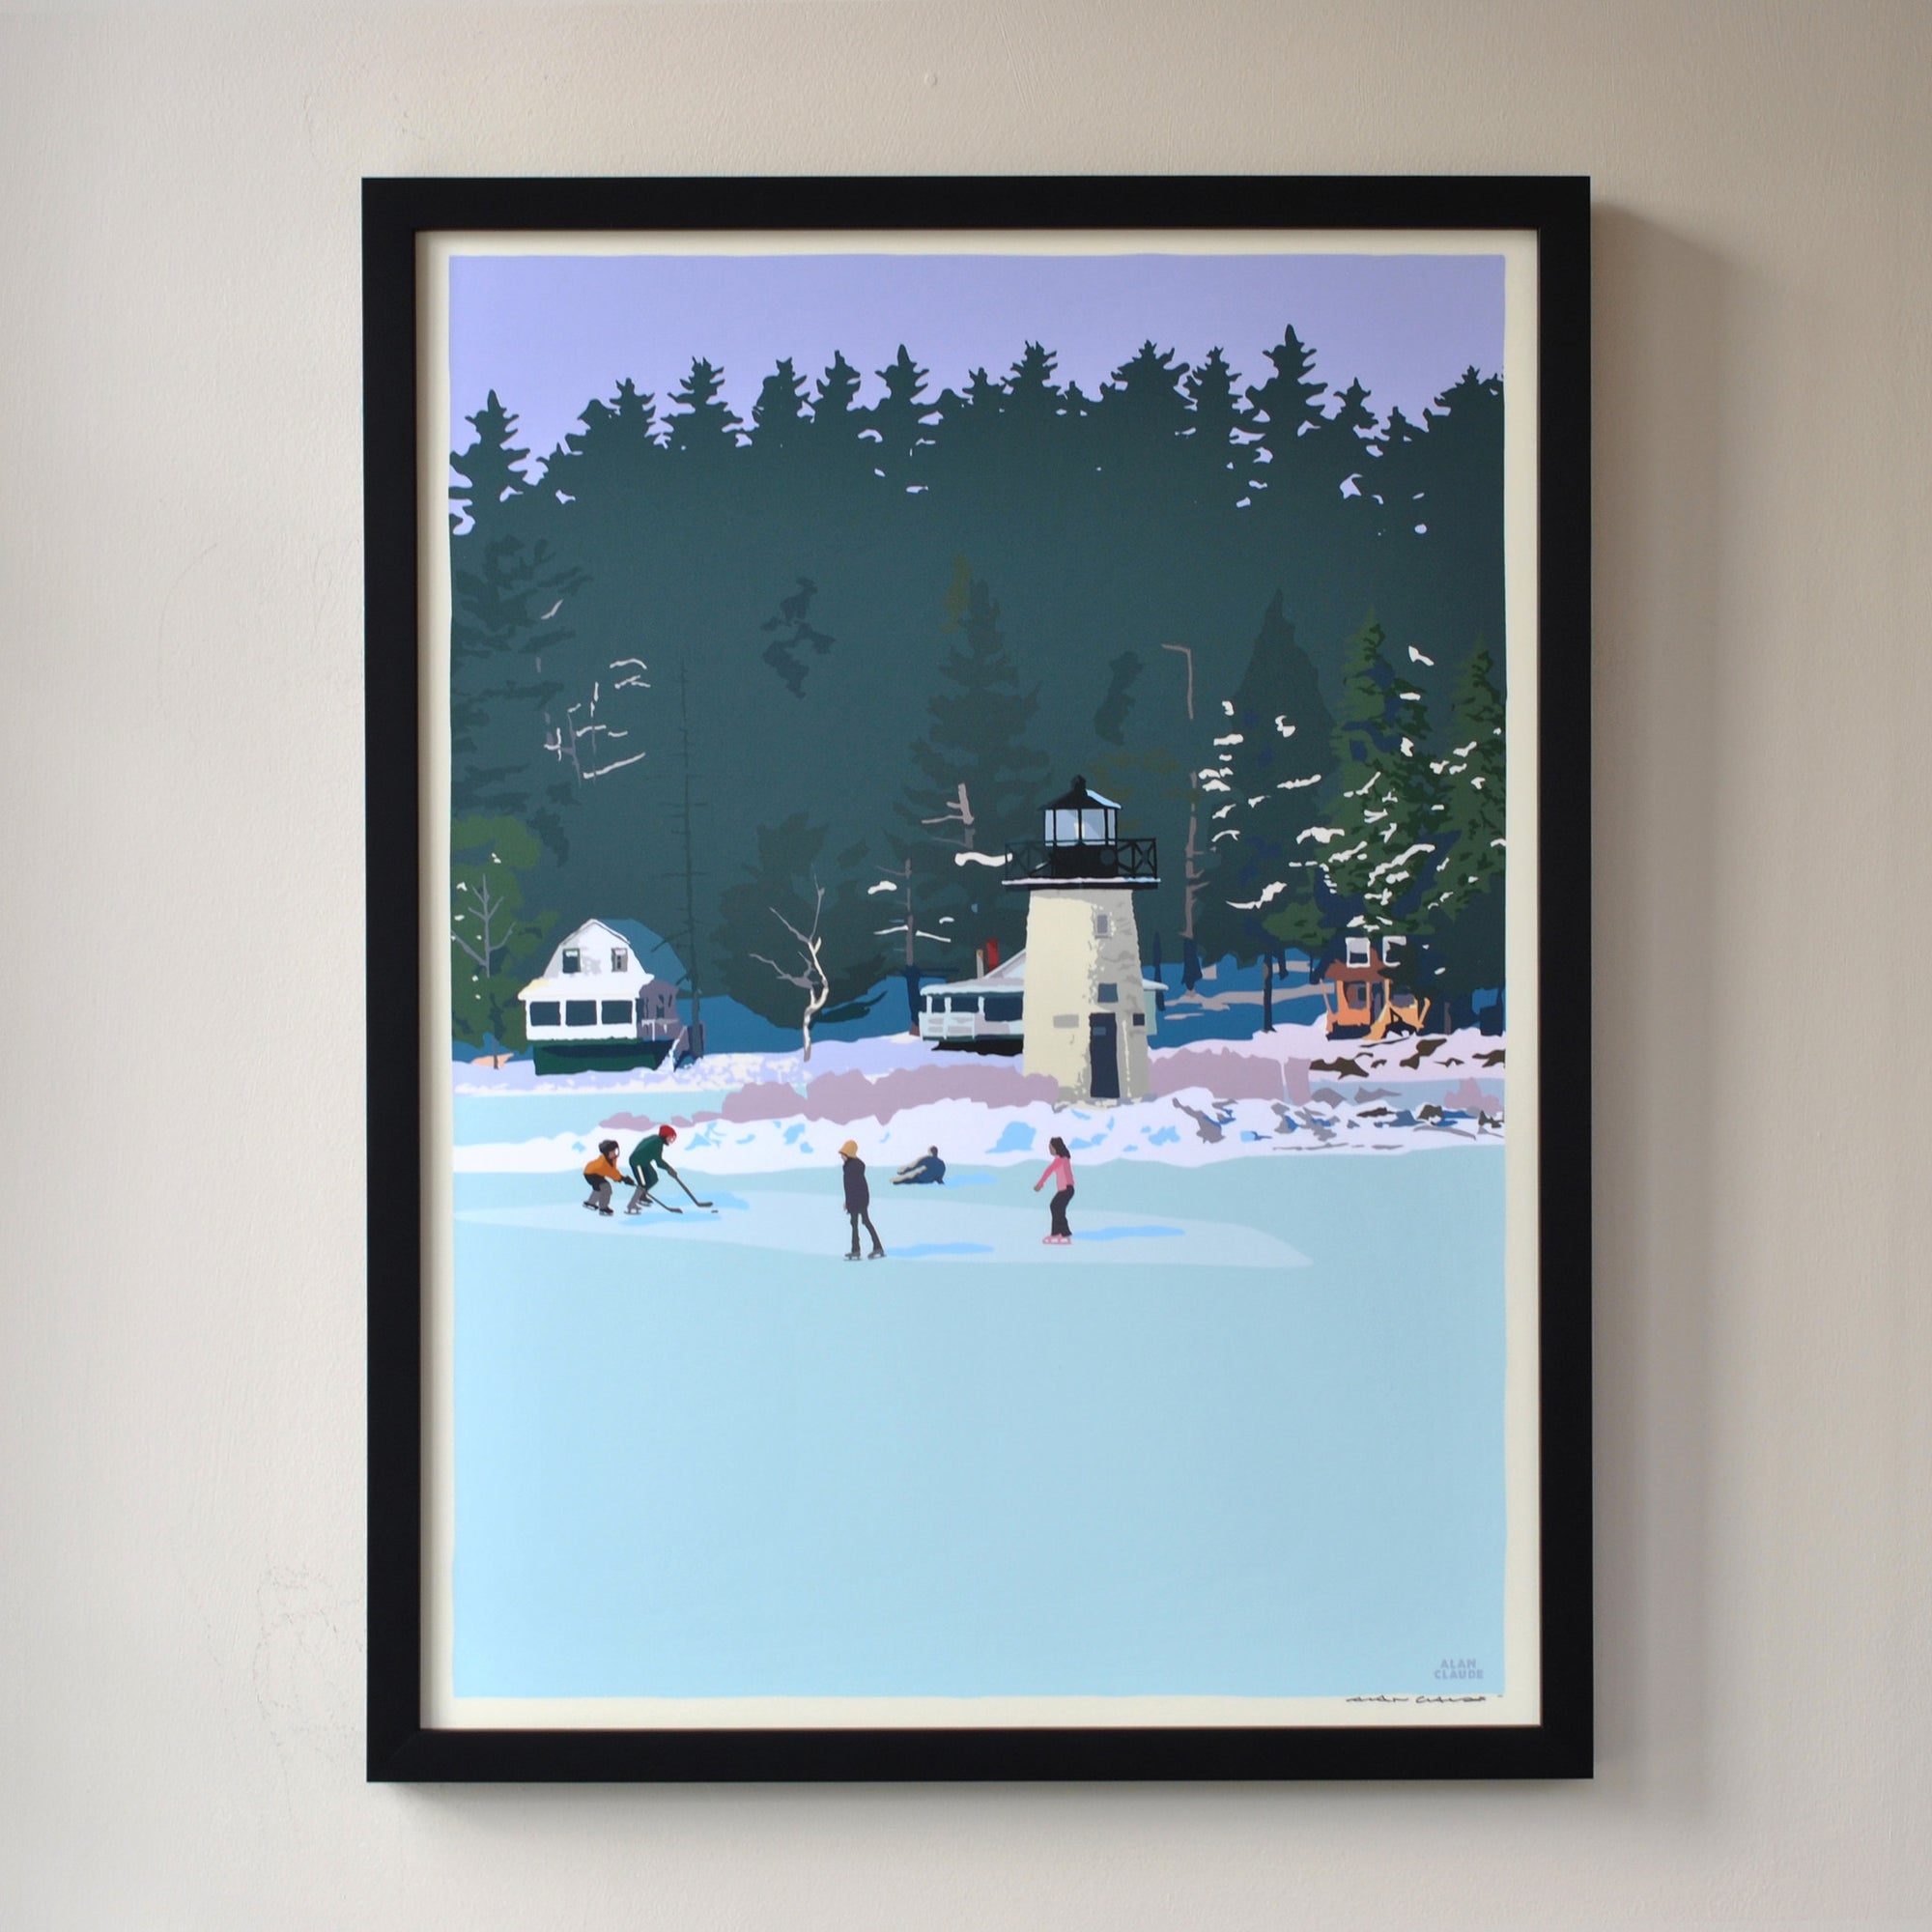 Ice Skating At Ladies Delight Lighthouse Art Print 18" x 24" Framed Wall Poster By Alan Claude - Maine